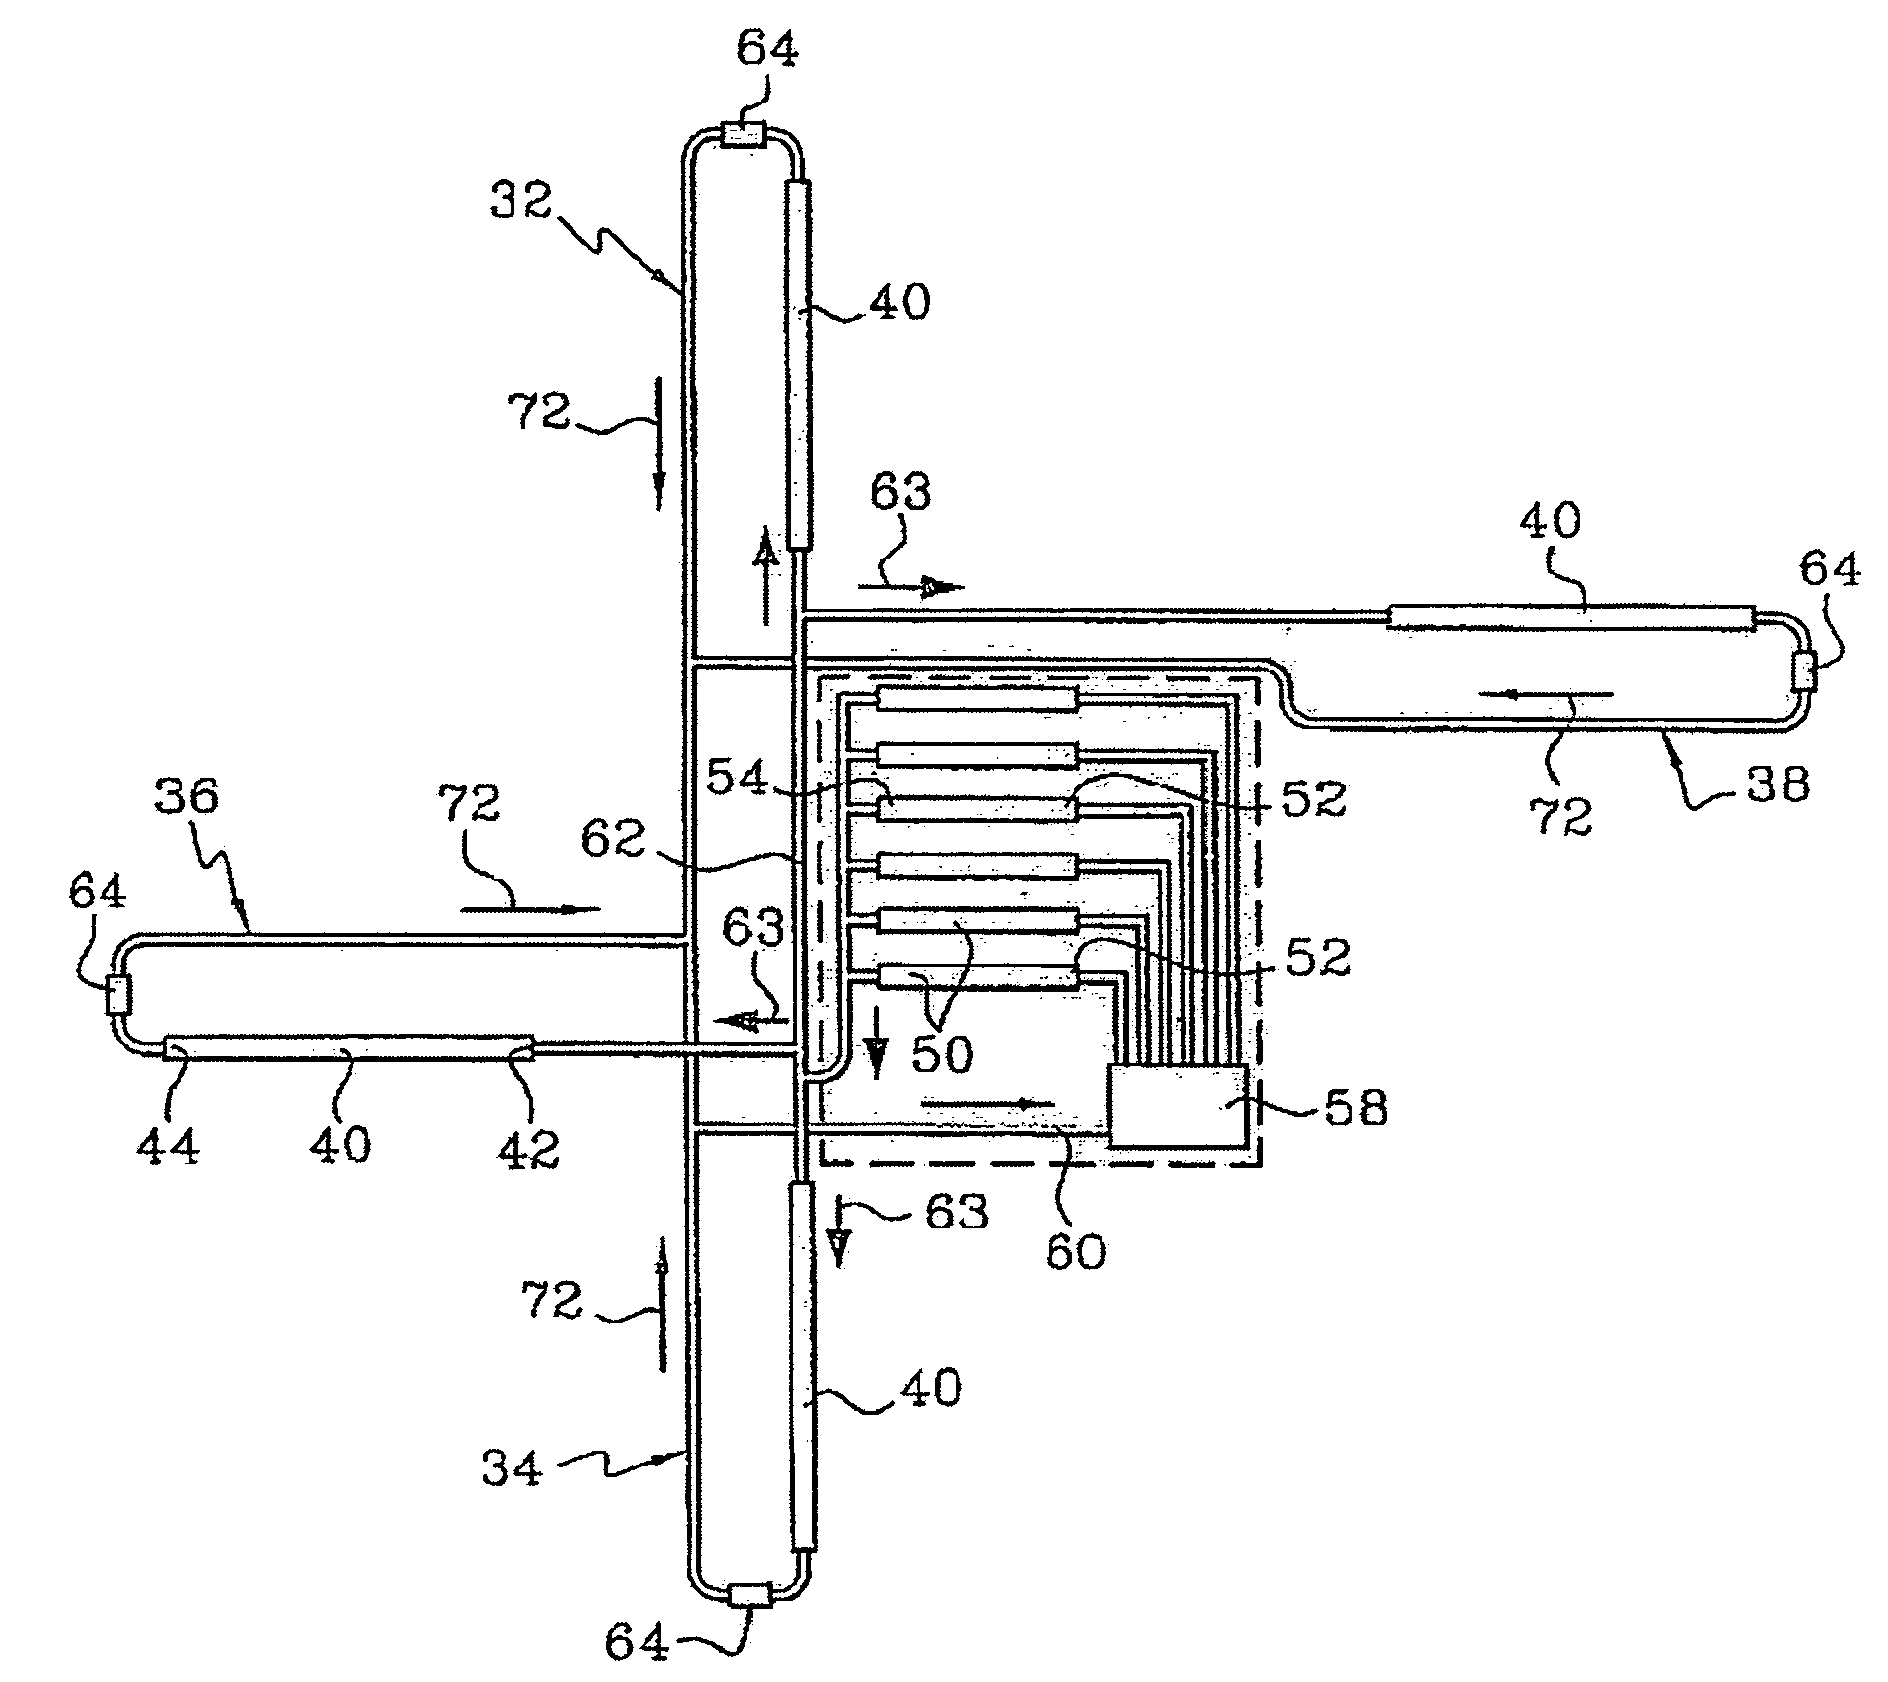 Satellite comprising means for transferring heat from a shelf supporting equipment to radiator panels